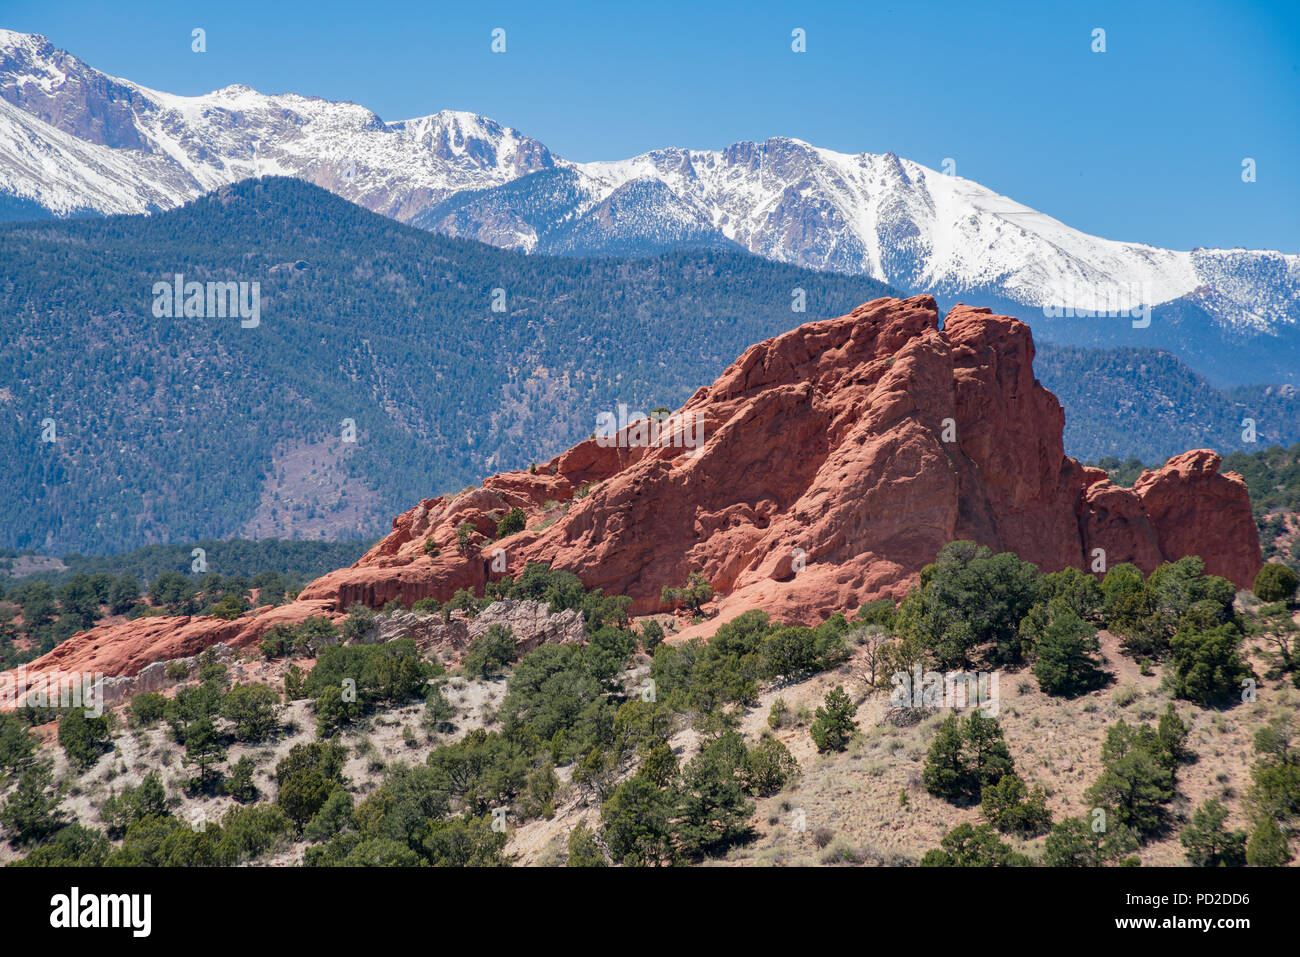 North Gateway Rock of the famous Garden of the Gods at Manitou Springs, Colorado Stock Photo